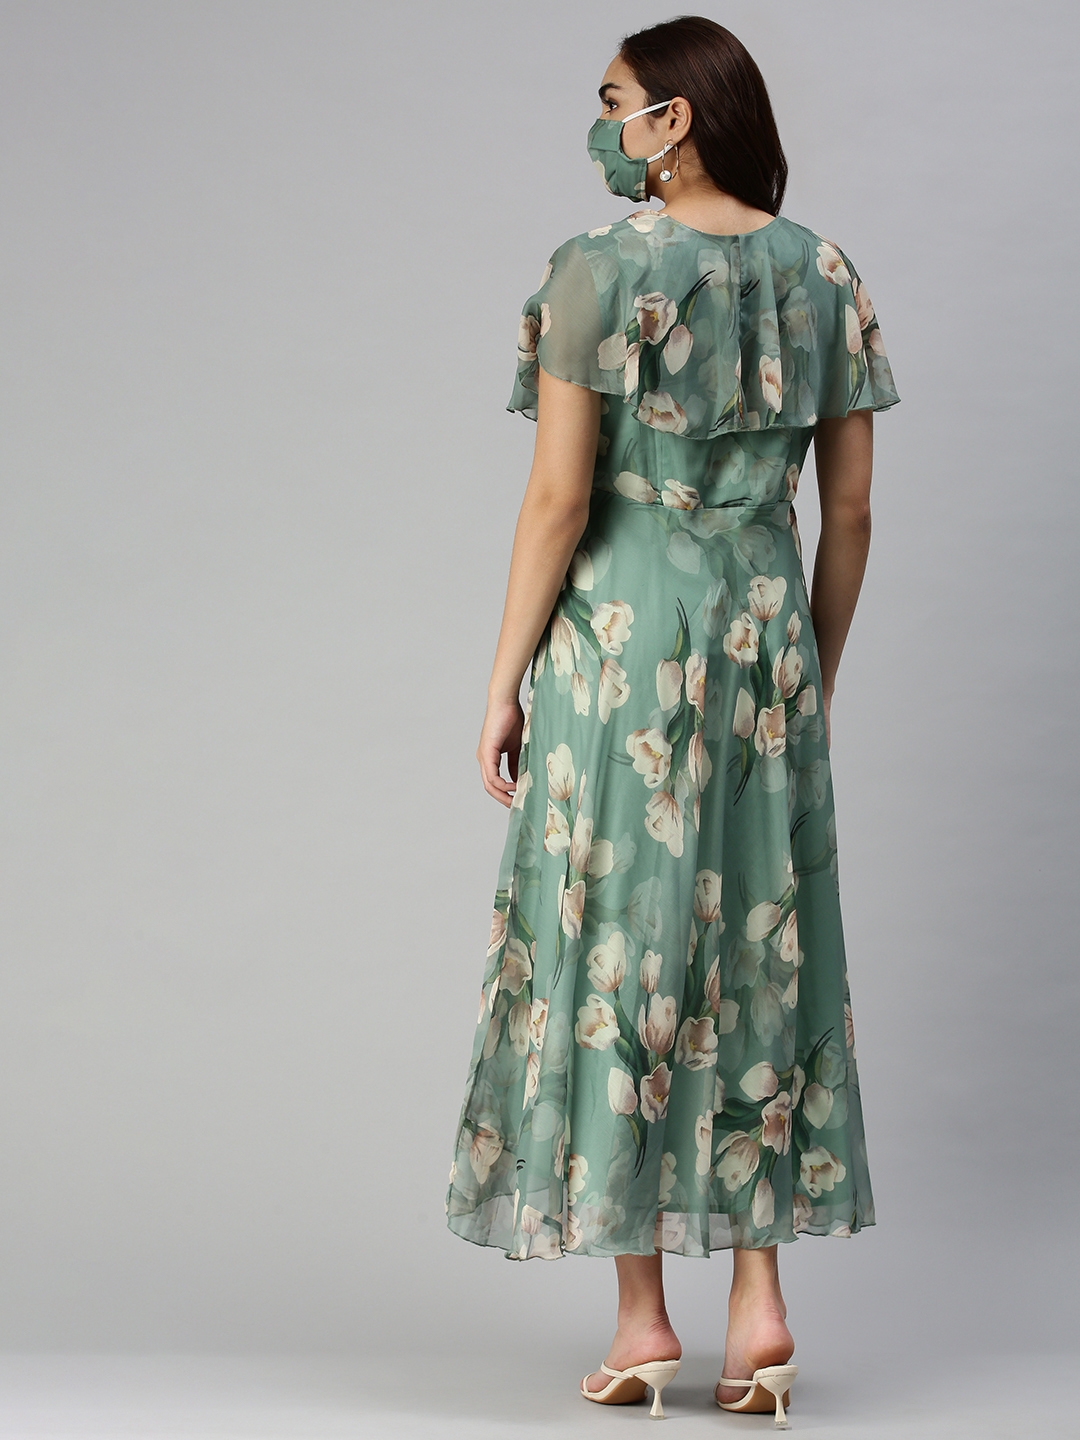 Women's Green Synthetic Printed Dresses